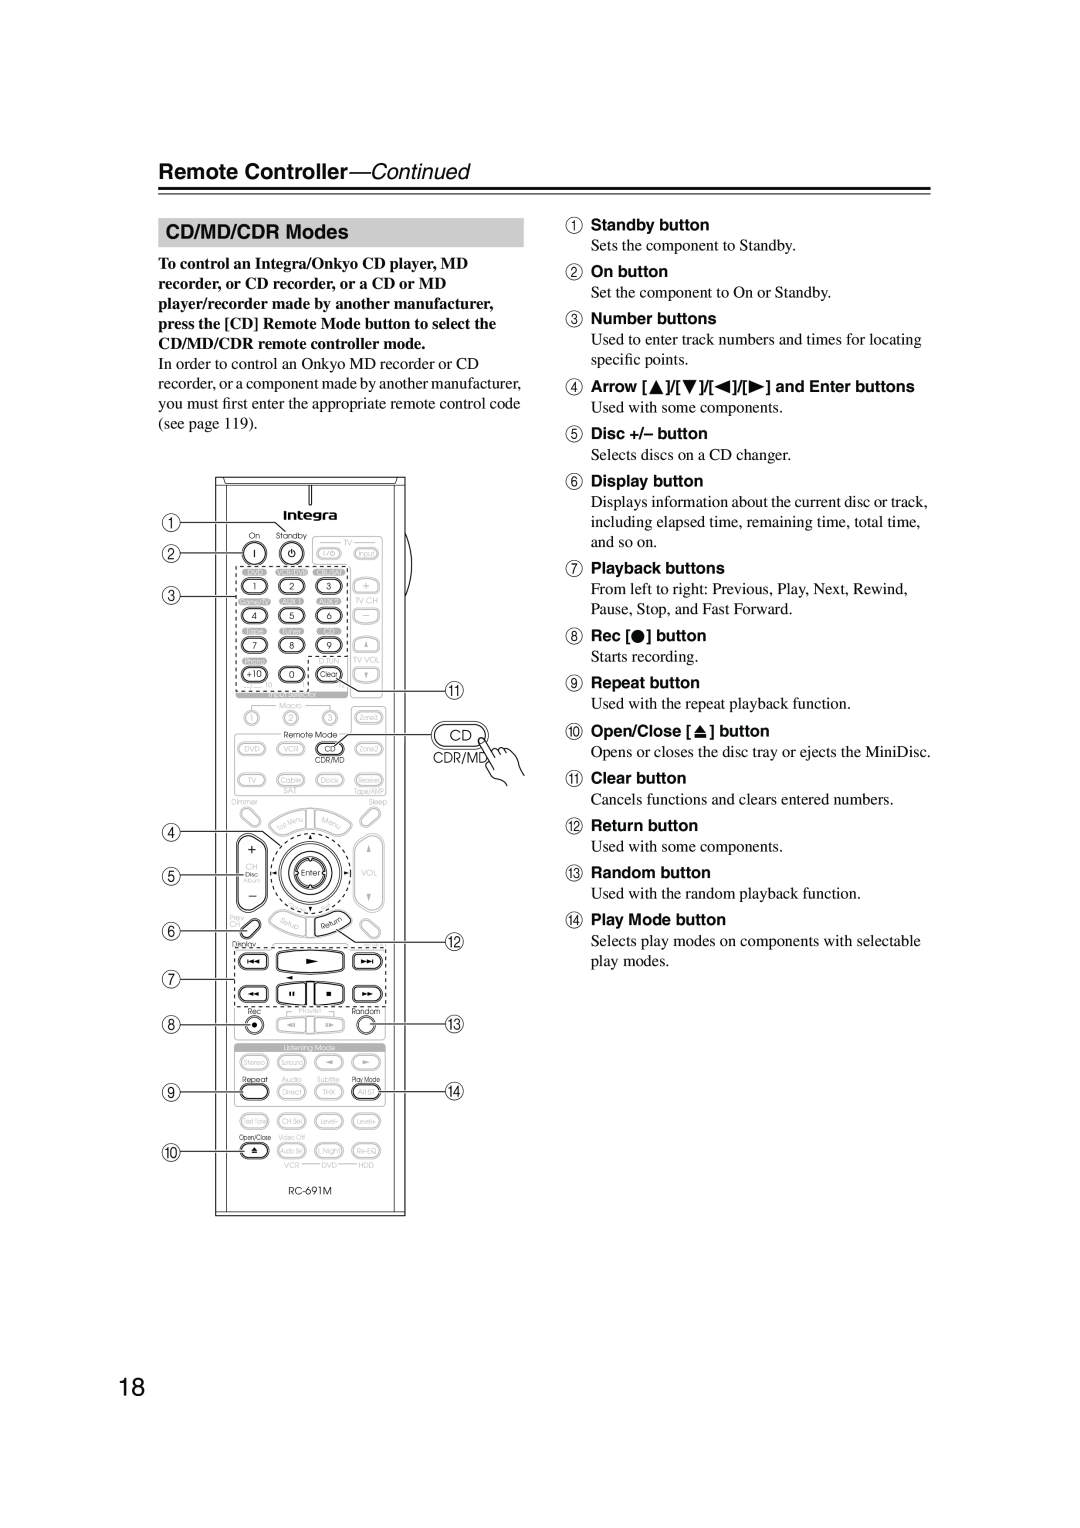 Integra DTR-7.8 instruction manual CD/MD/CDR Modes, Remote Controller—Continued 